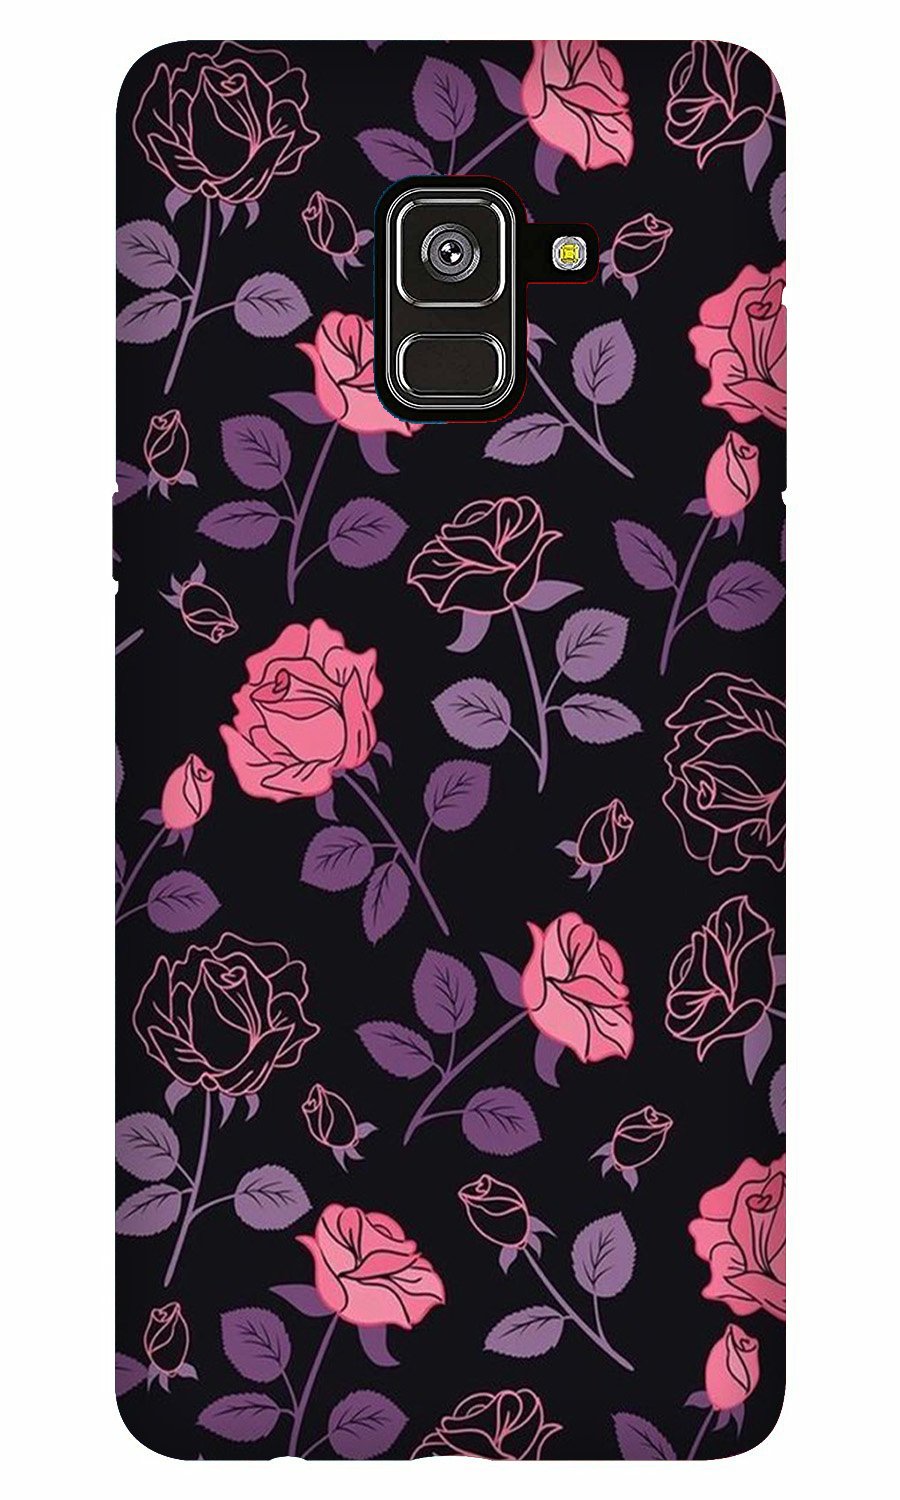 Rose Black Background Case for Galaxy A5 (2018)